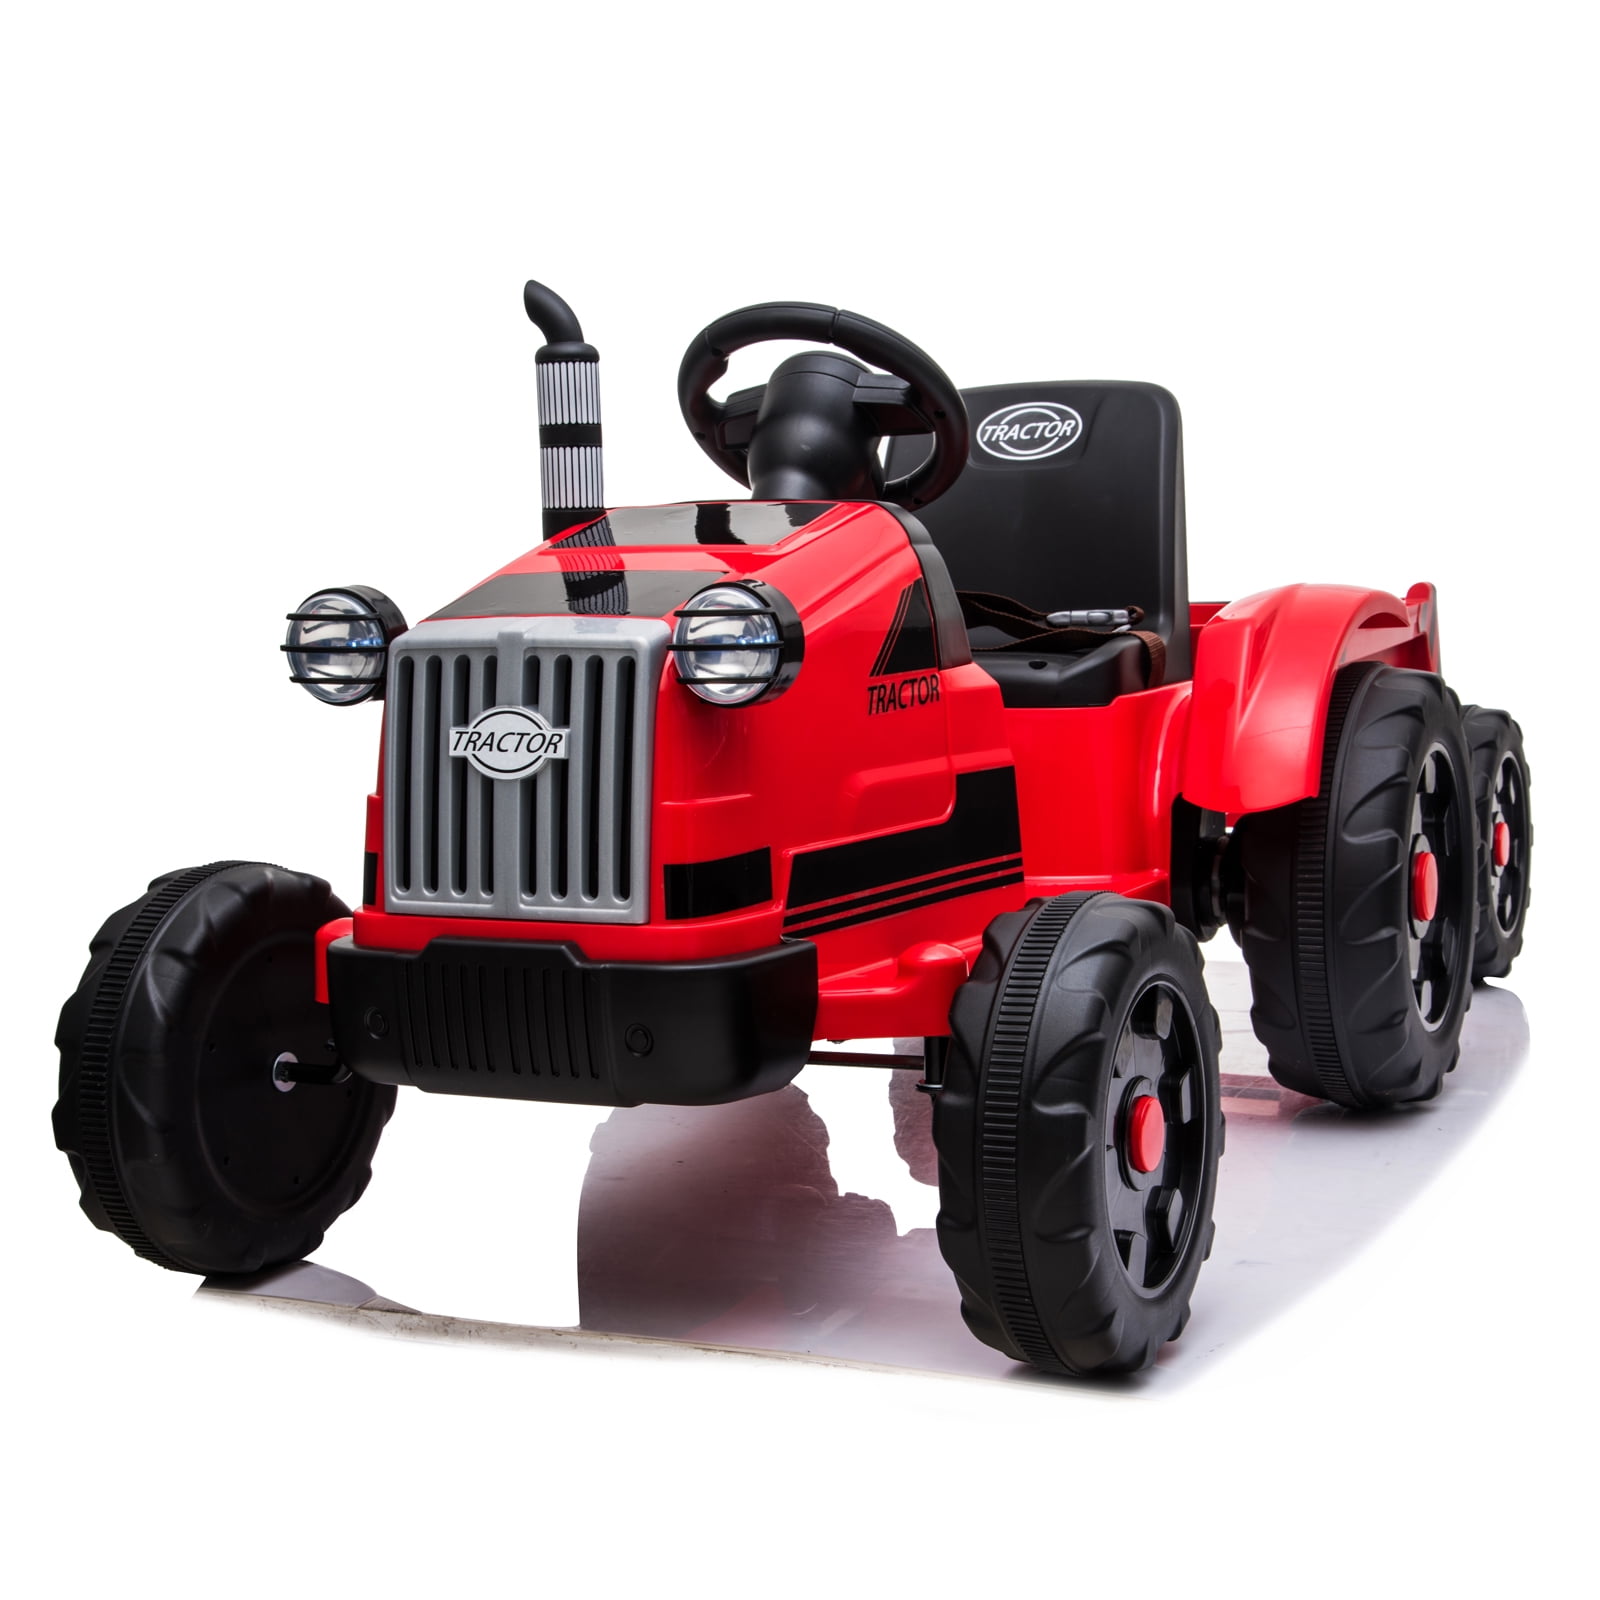 Rose Red TOBBI 12V Kids Electric Battery-Powered Ride On Toy Tractor w/ Trailer 